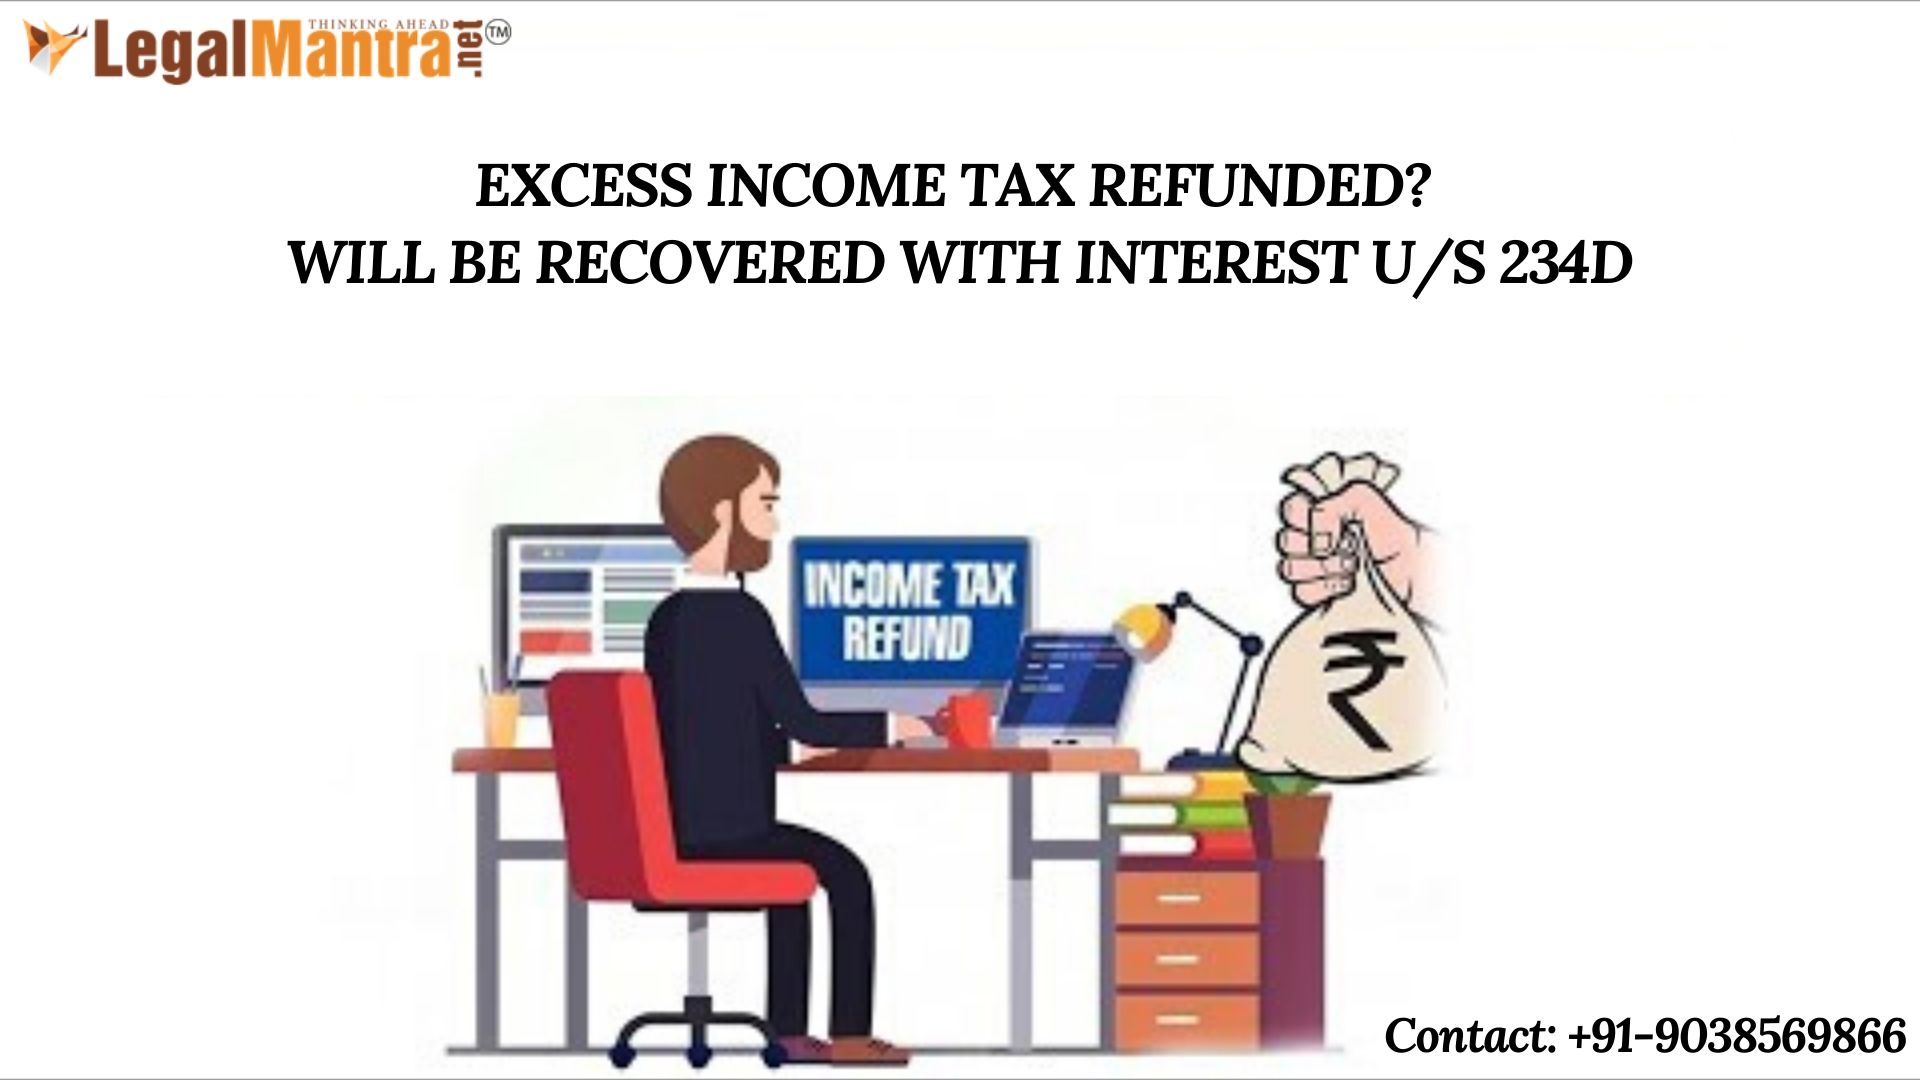 EXCESS INCOME TAX REFUNDED? WILL BE RECOVERED WITH INTEREST U/S 234D